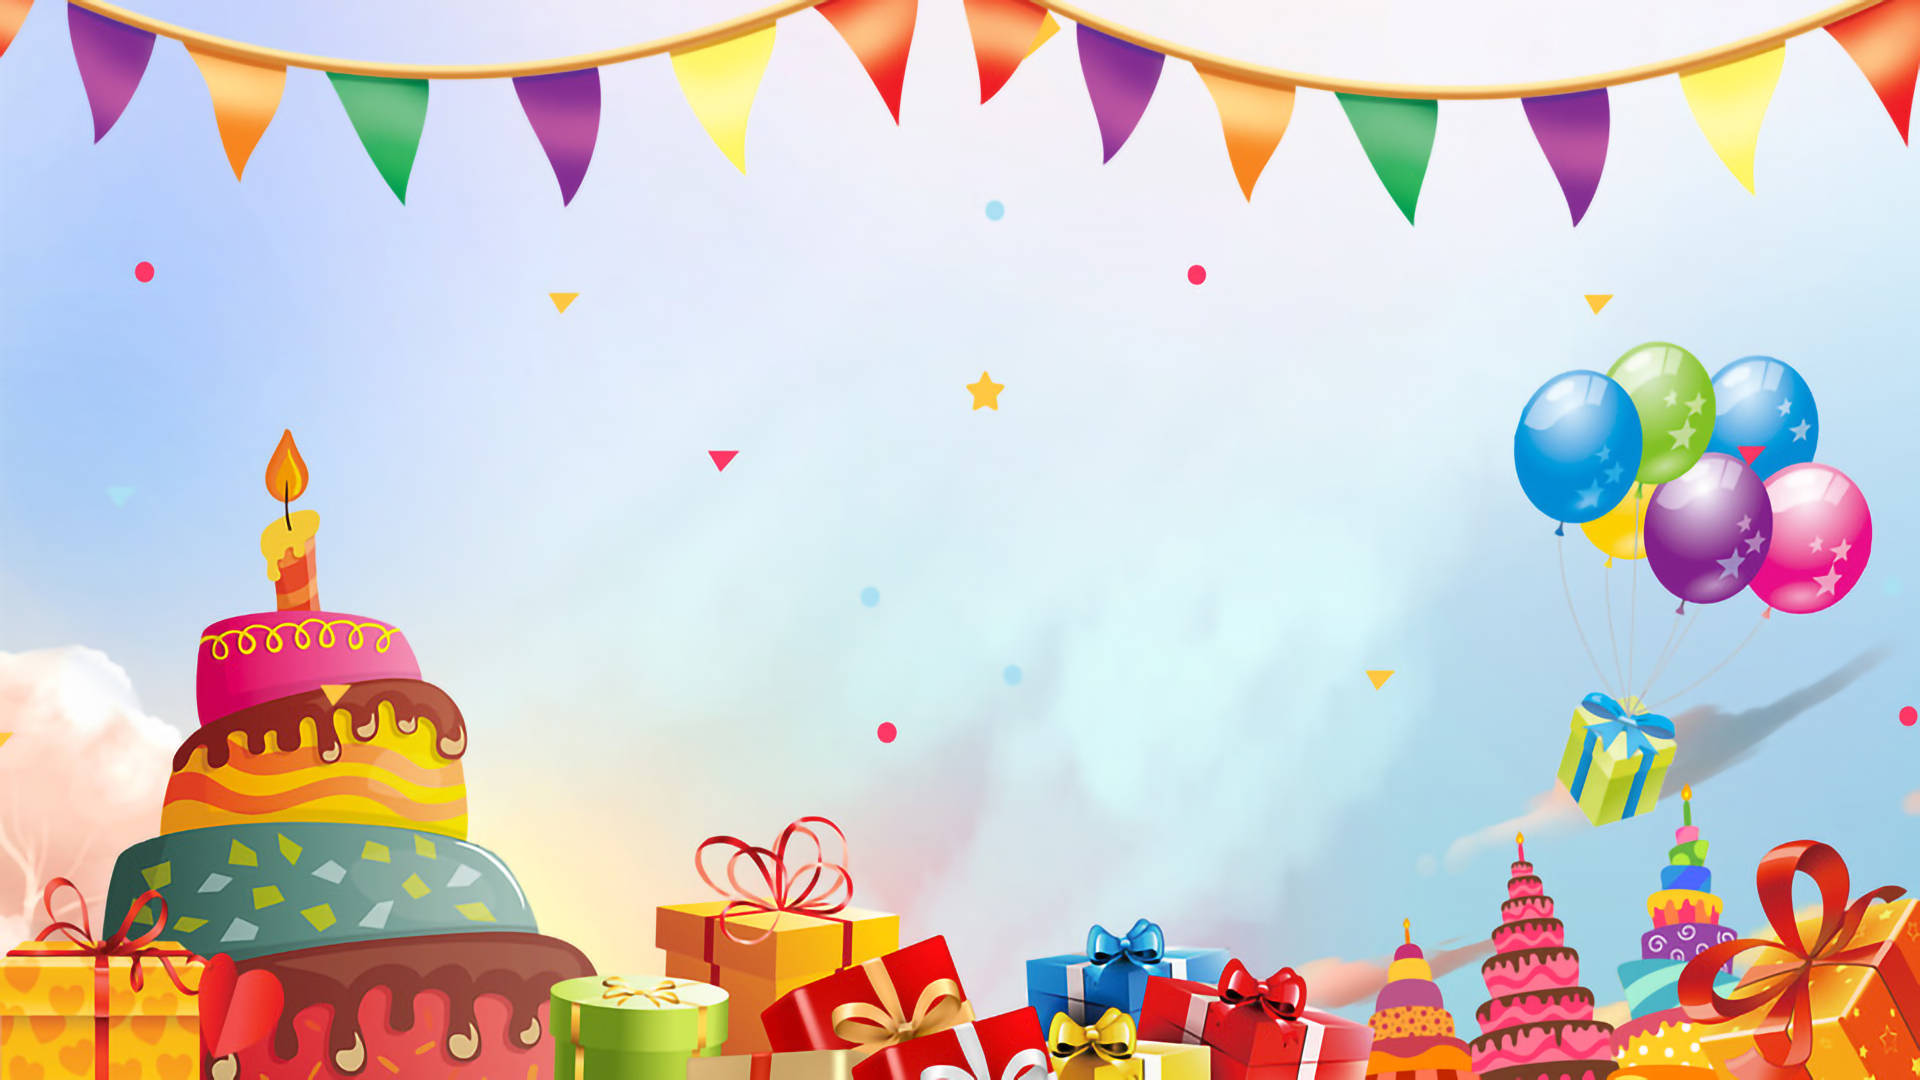 Party Background Images - Free Download on Freepik